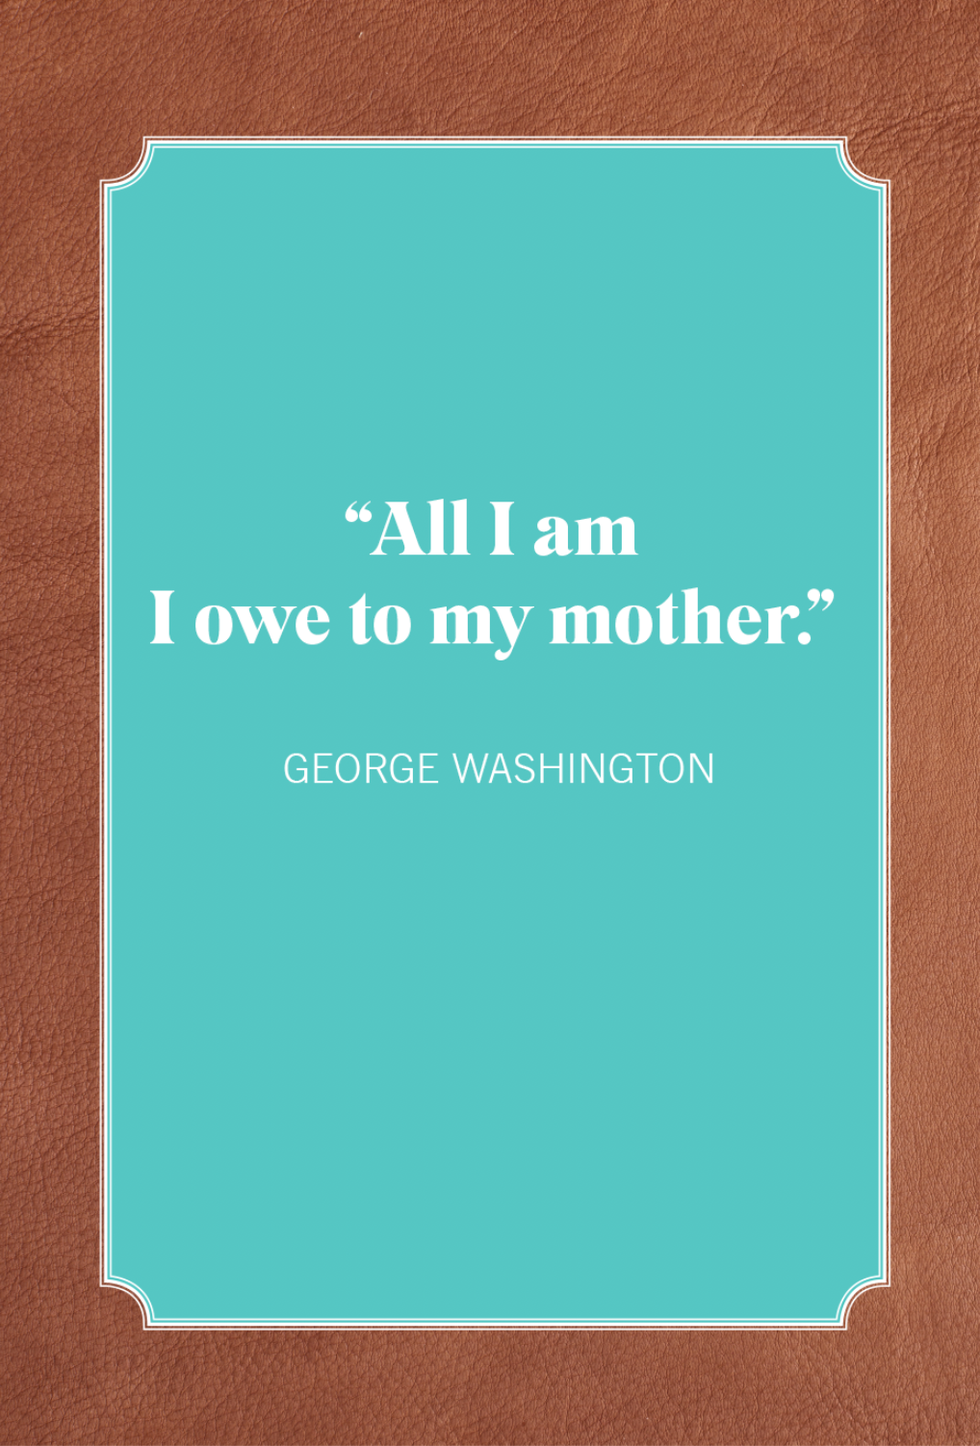 40 Best Boy Mom Quotes - Quotes About Mothers of Sons